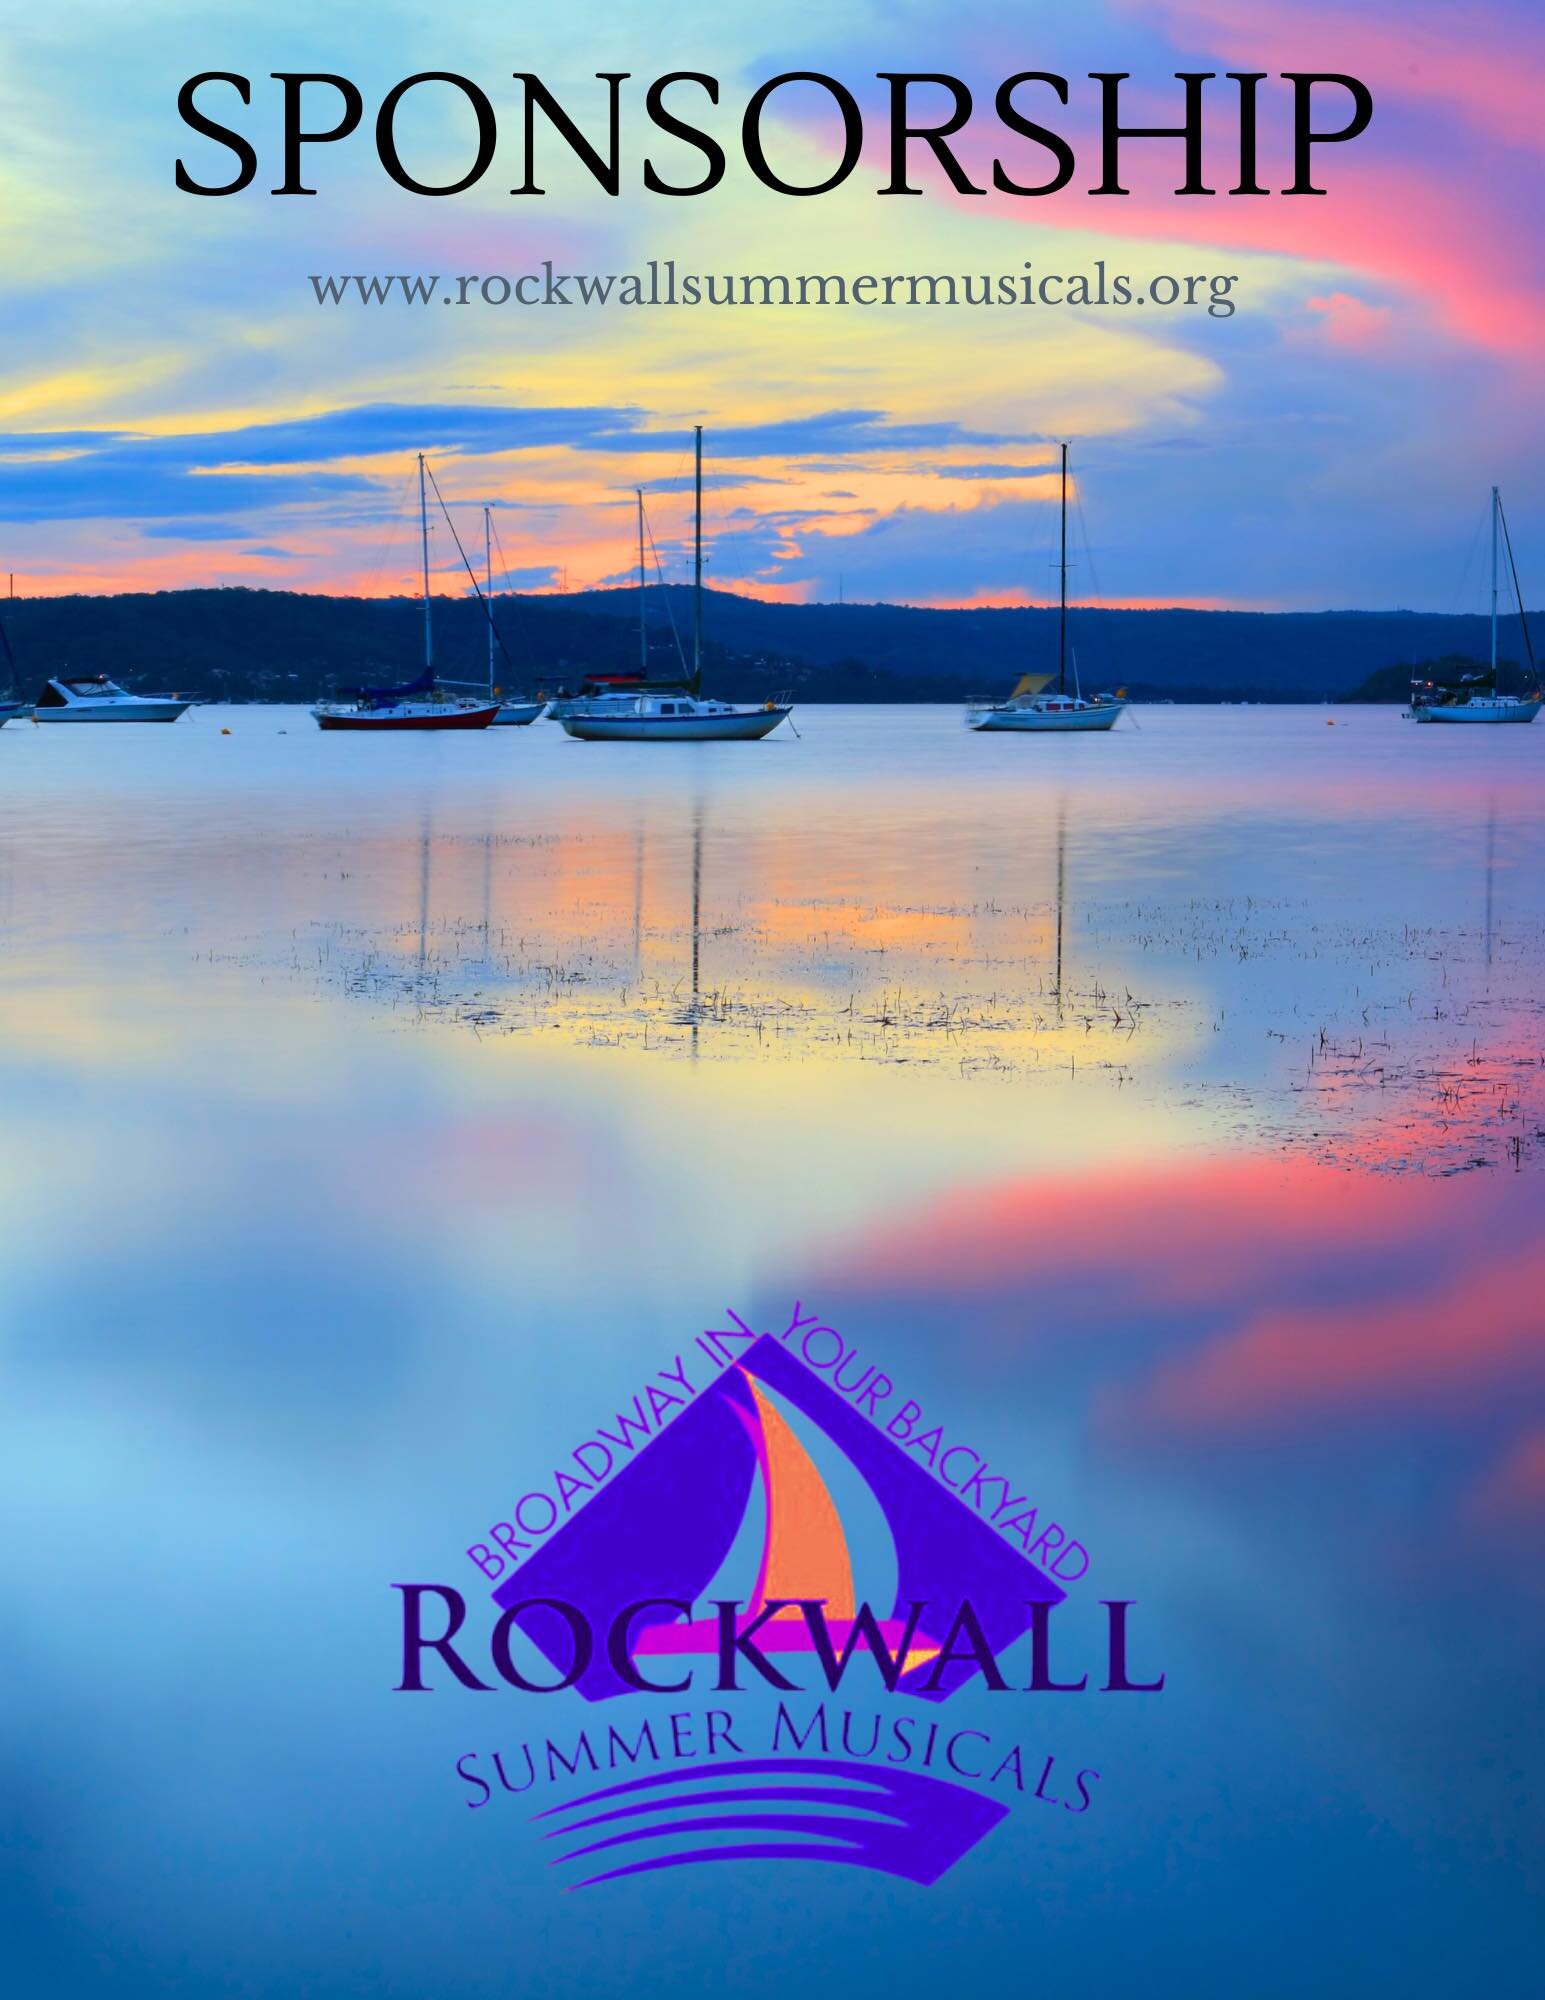 Rockwall Summer Musicals would love your support!! Please consider one of our Sponsorship opportunities.